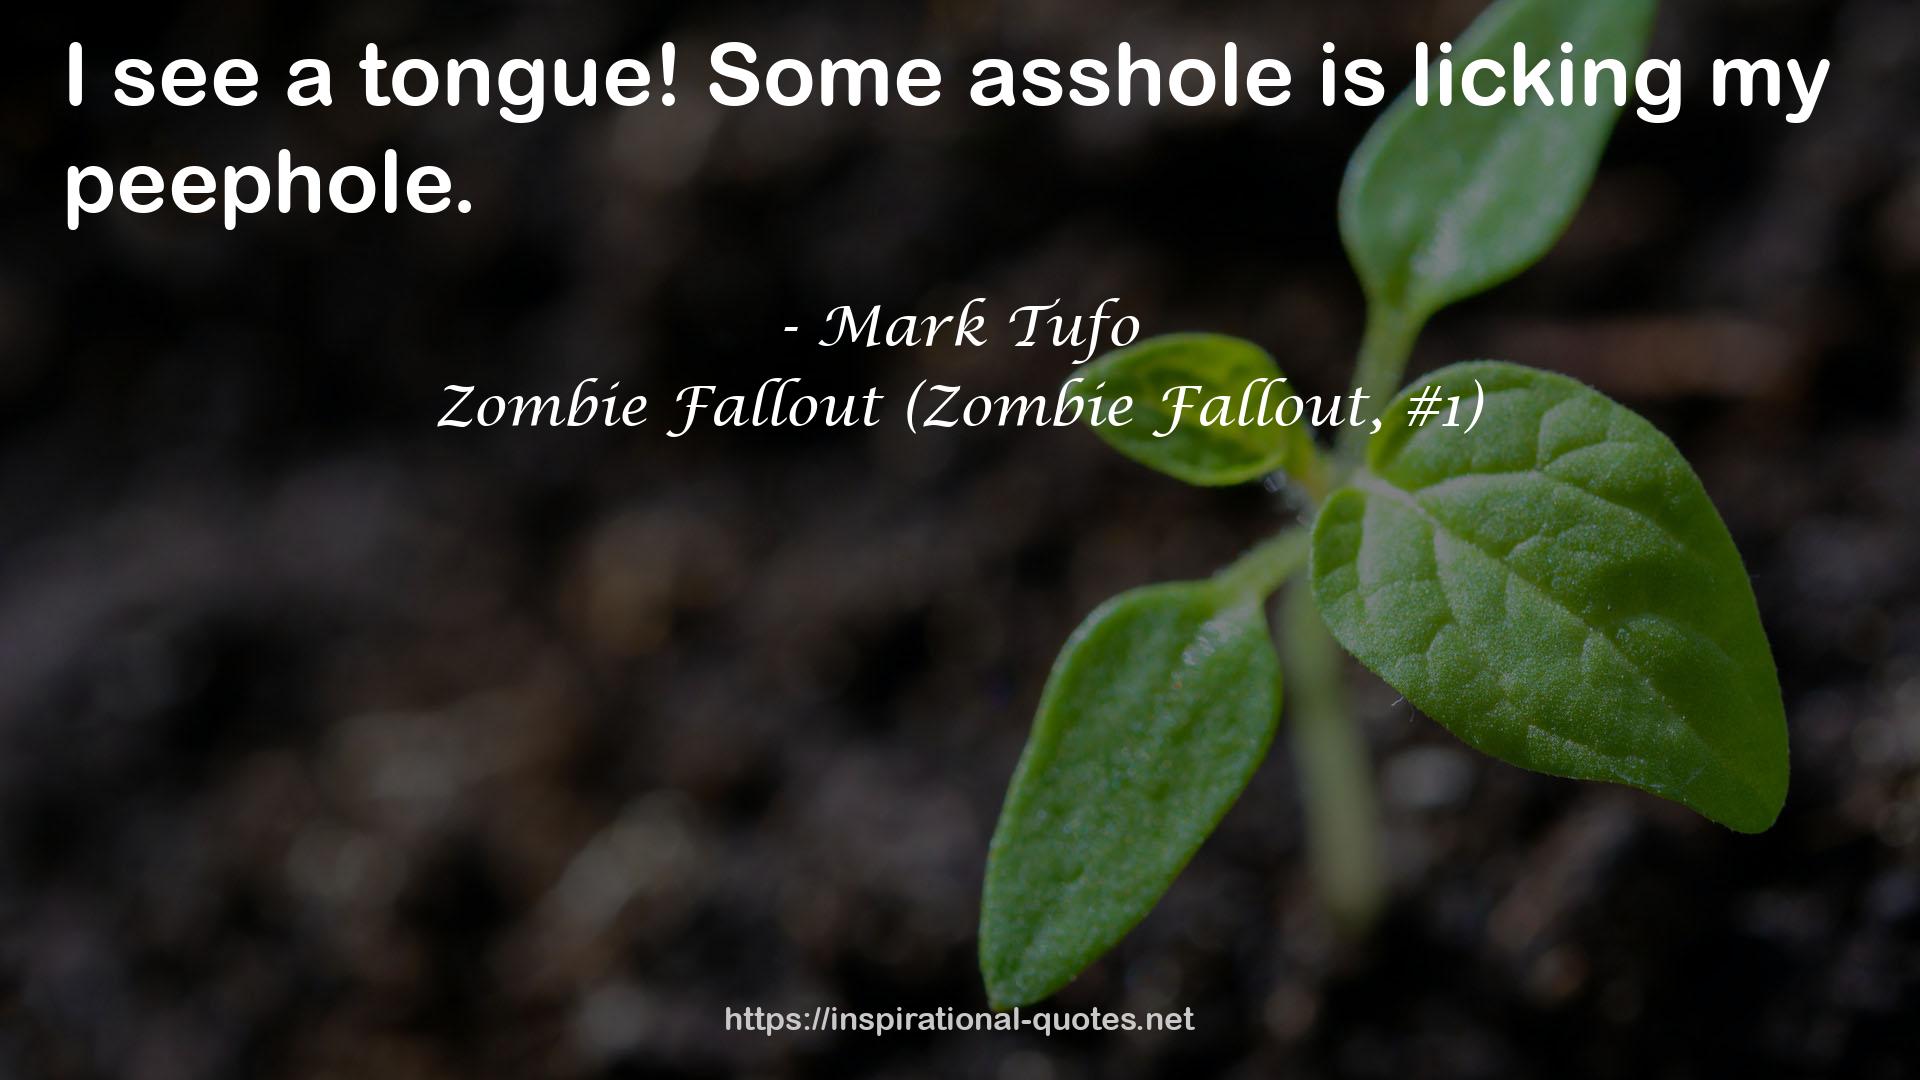 Zombie Fallout (Zombie Fallout, #1) QUOTES